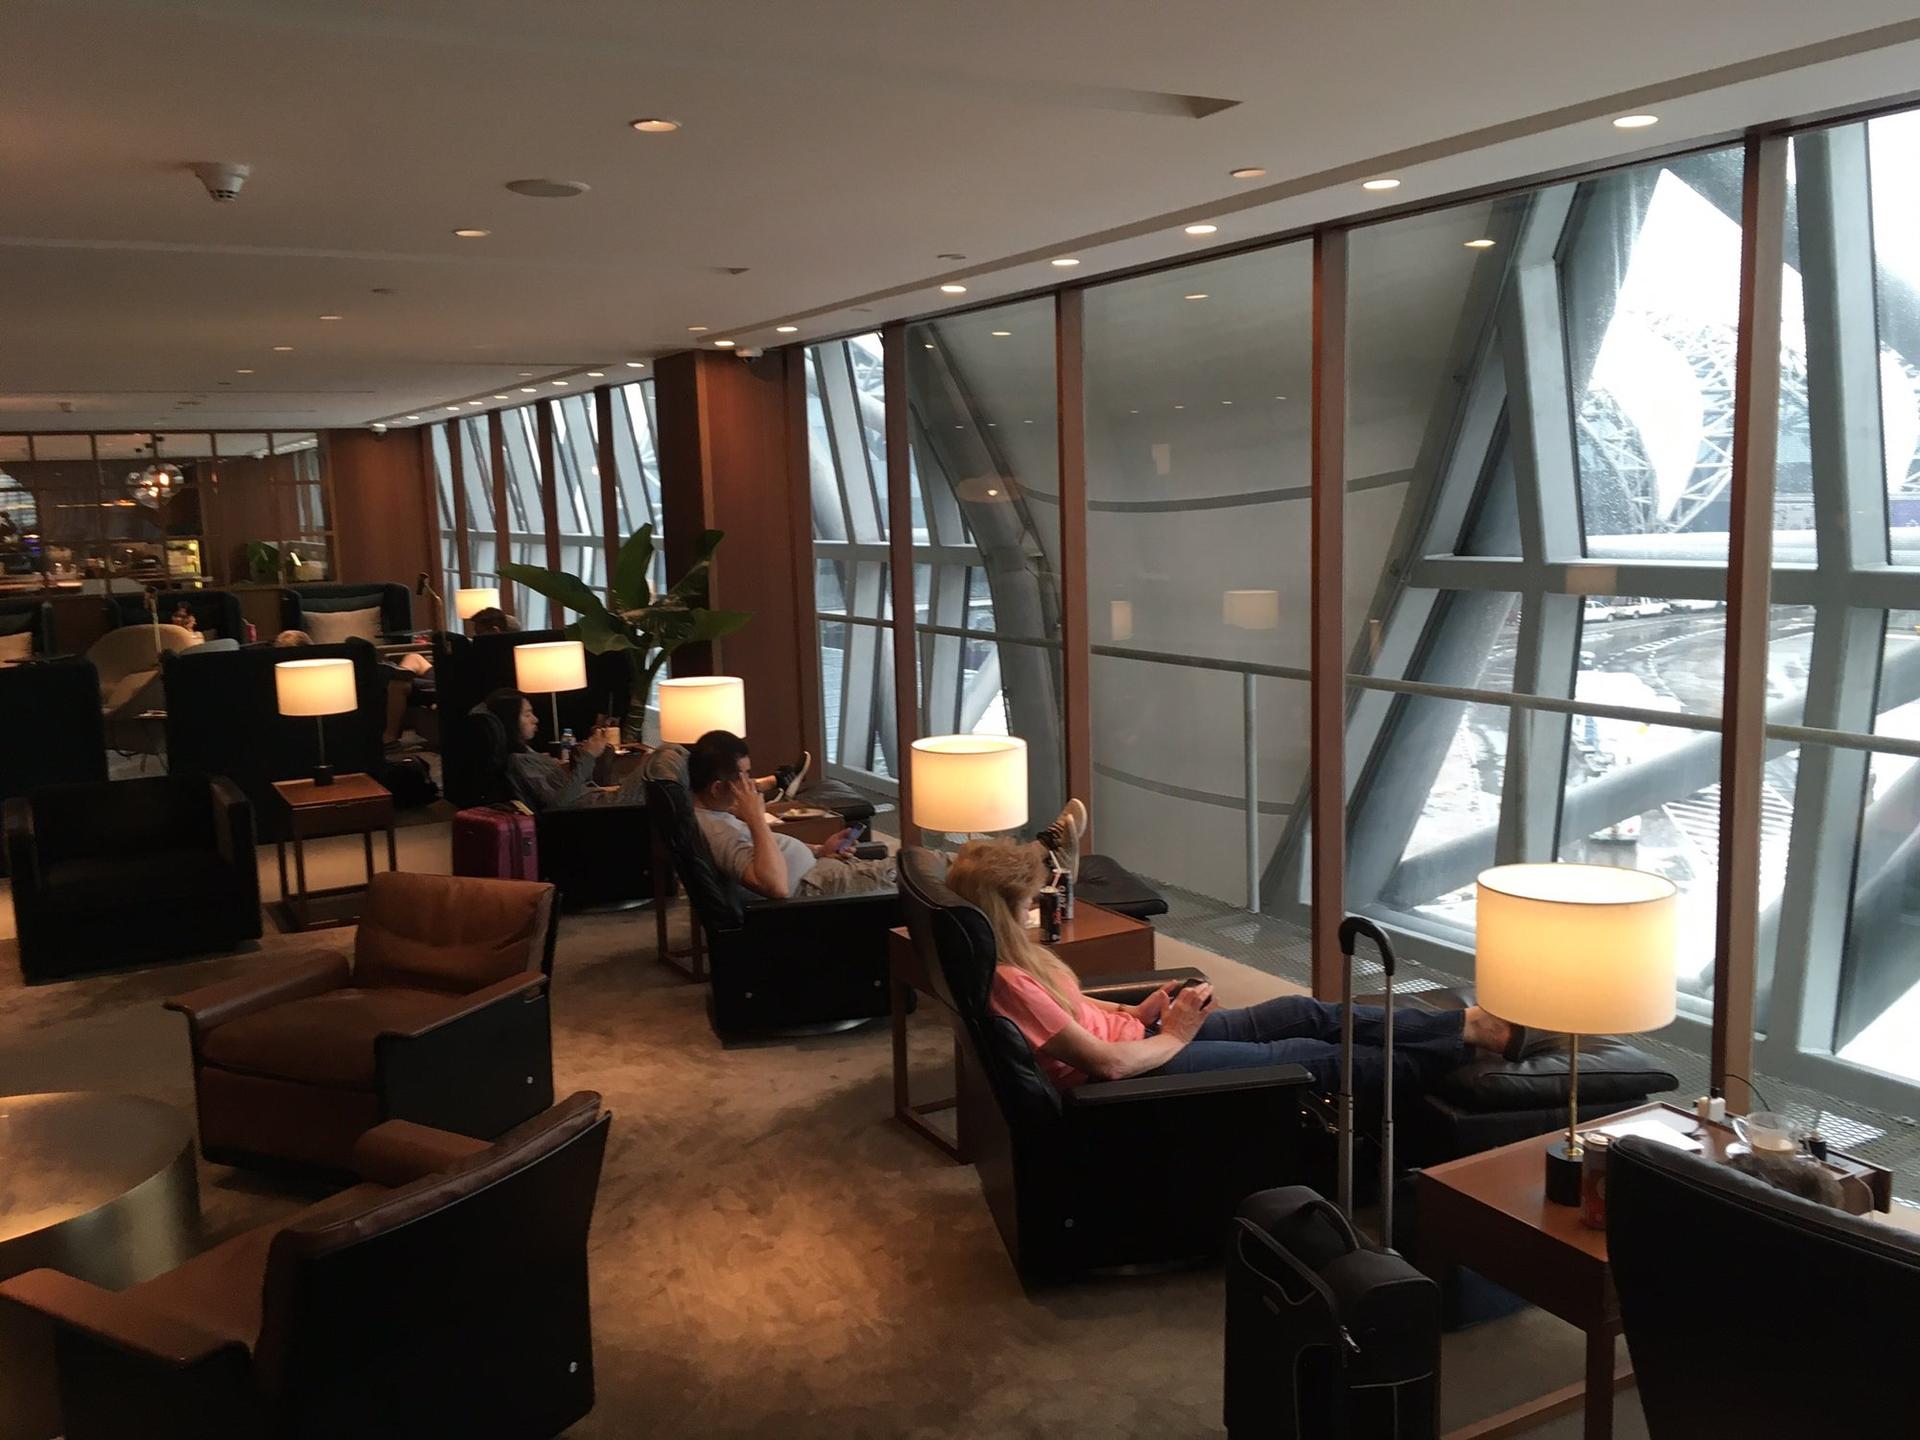 Cathay Pacific First and Business Class Lounge image 55 of 69